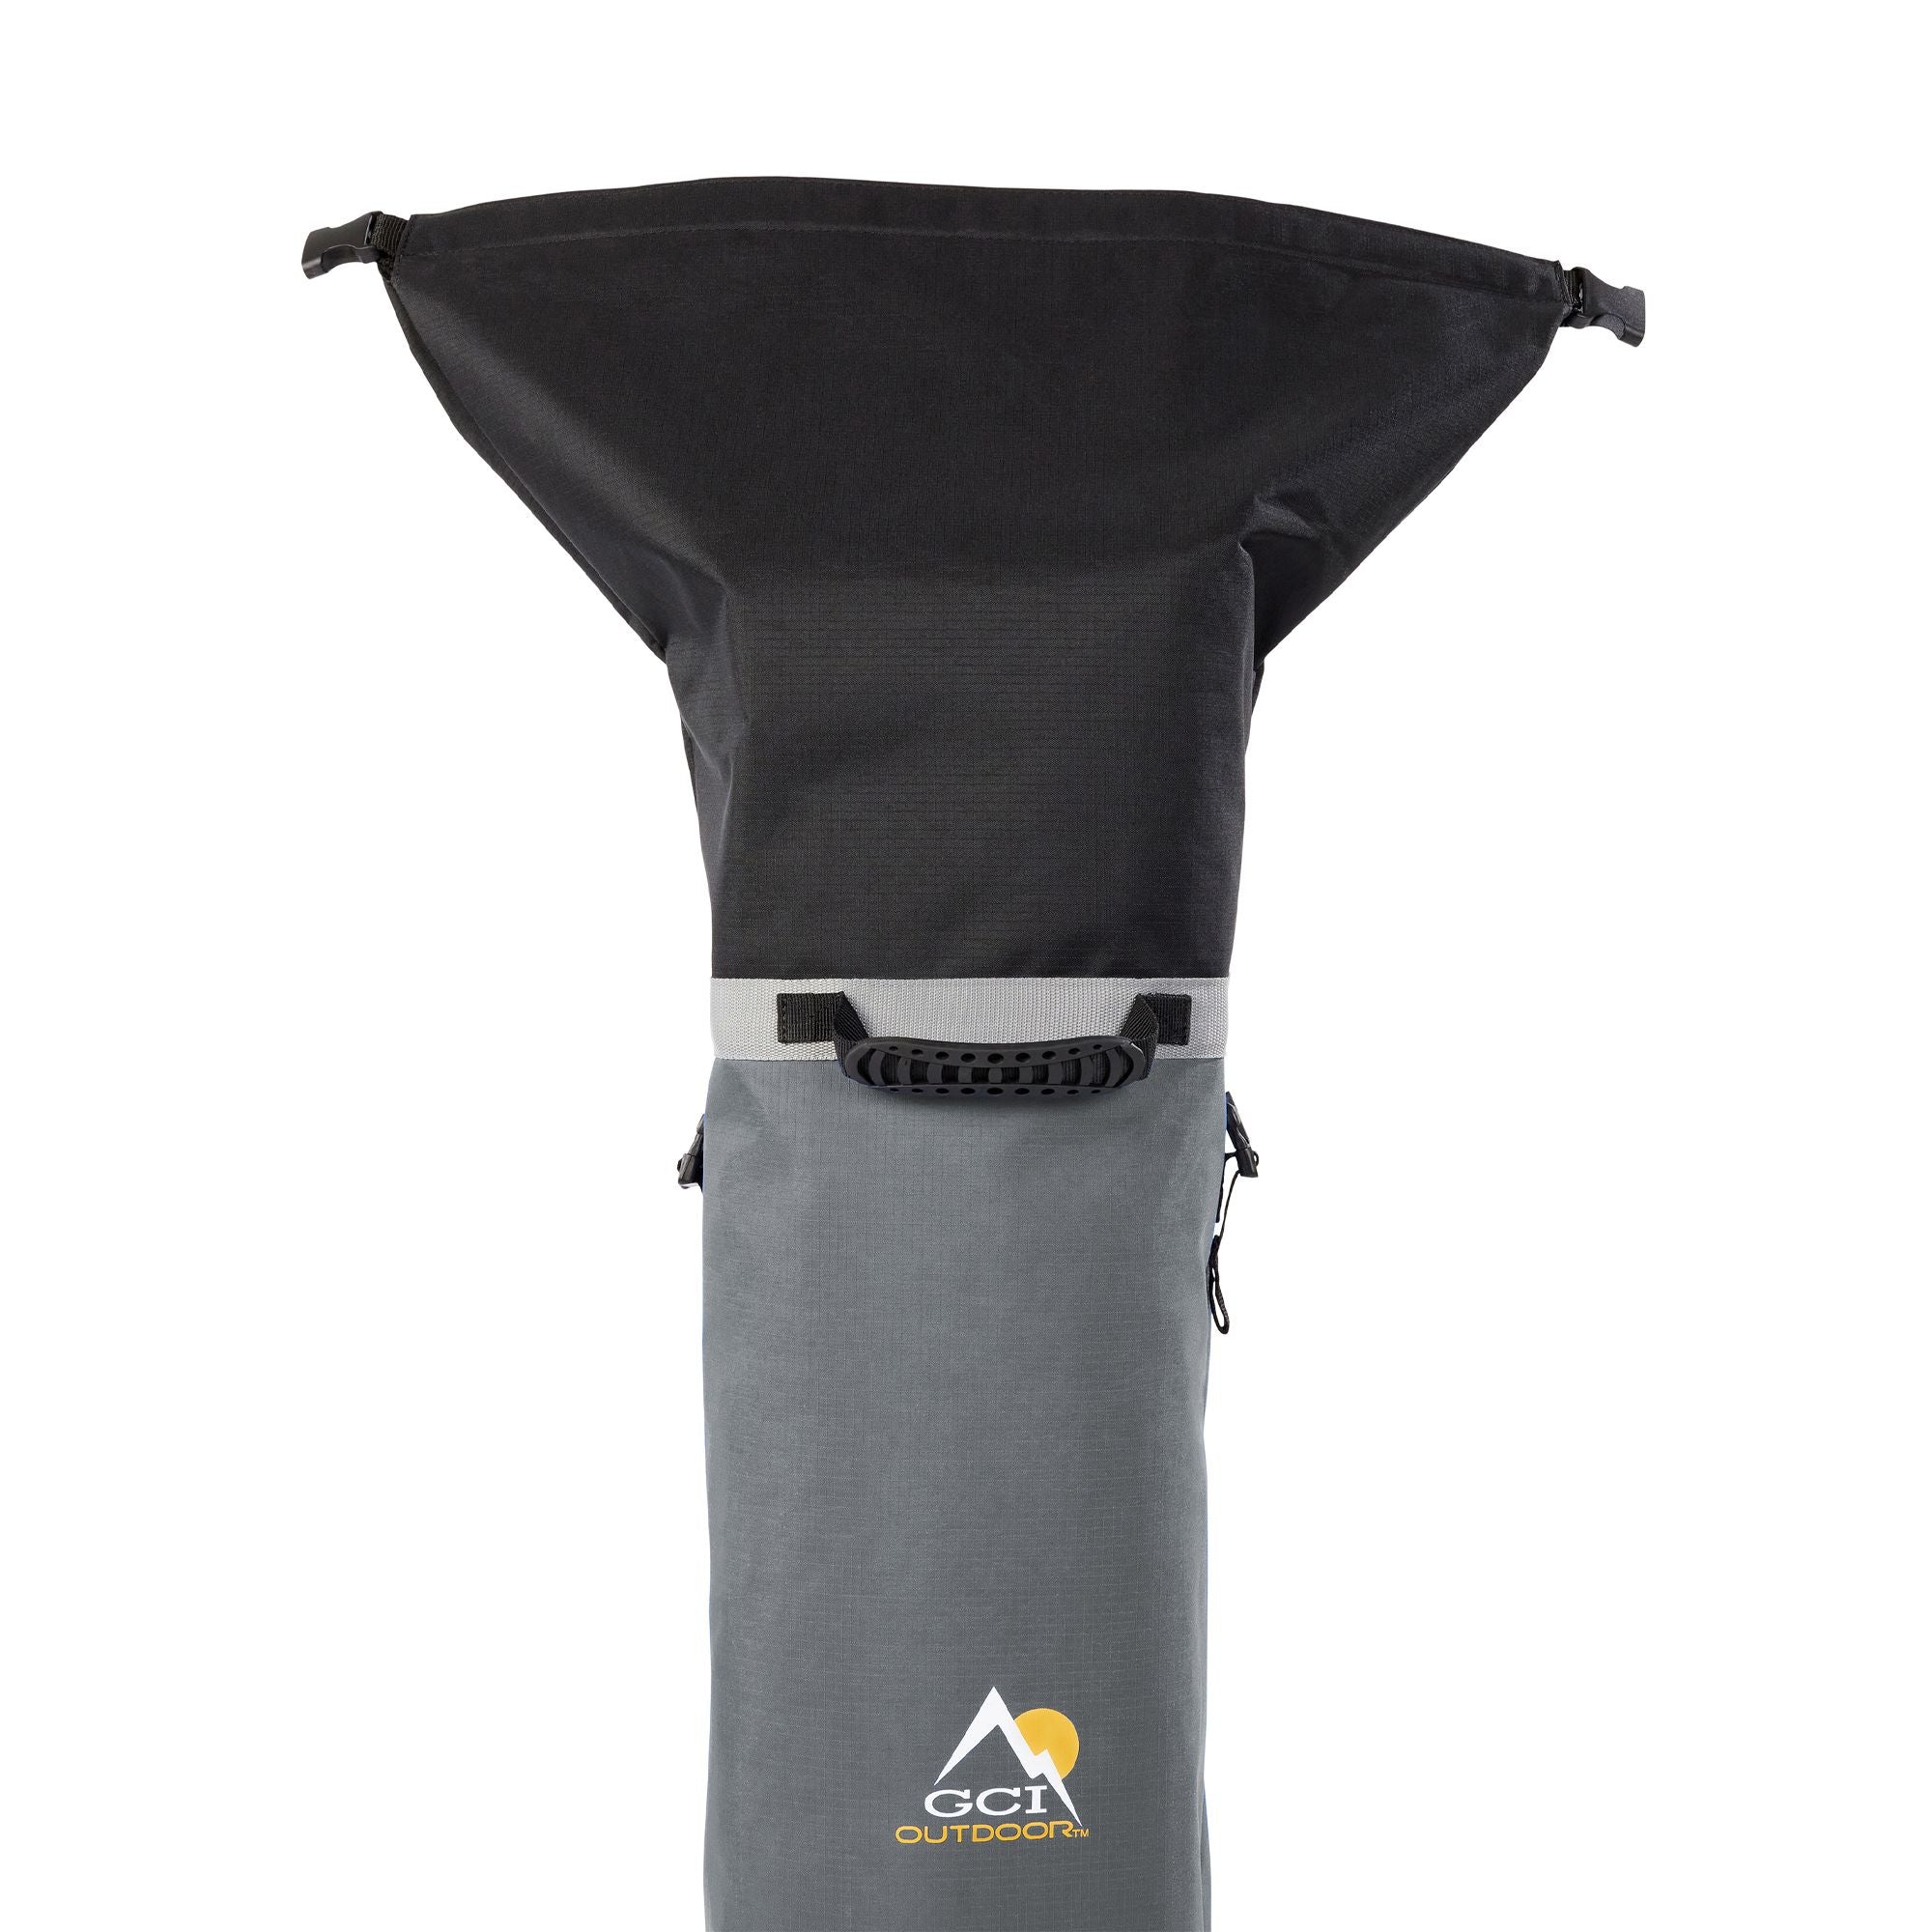 LevrUp Canopy, Mercury Gray, Large Mouth Opening